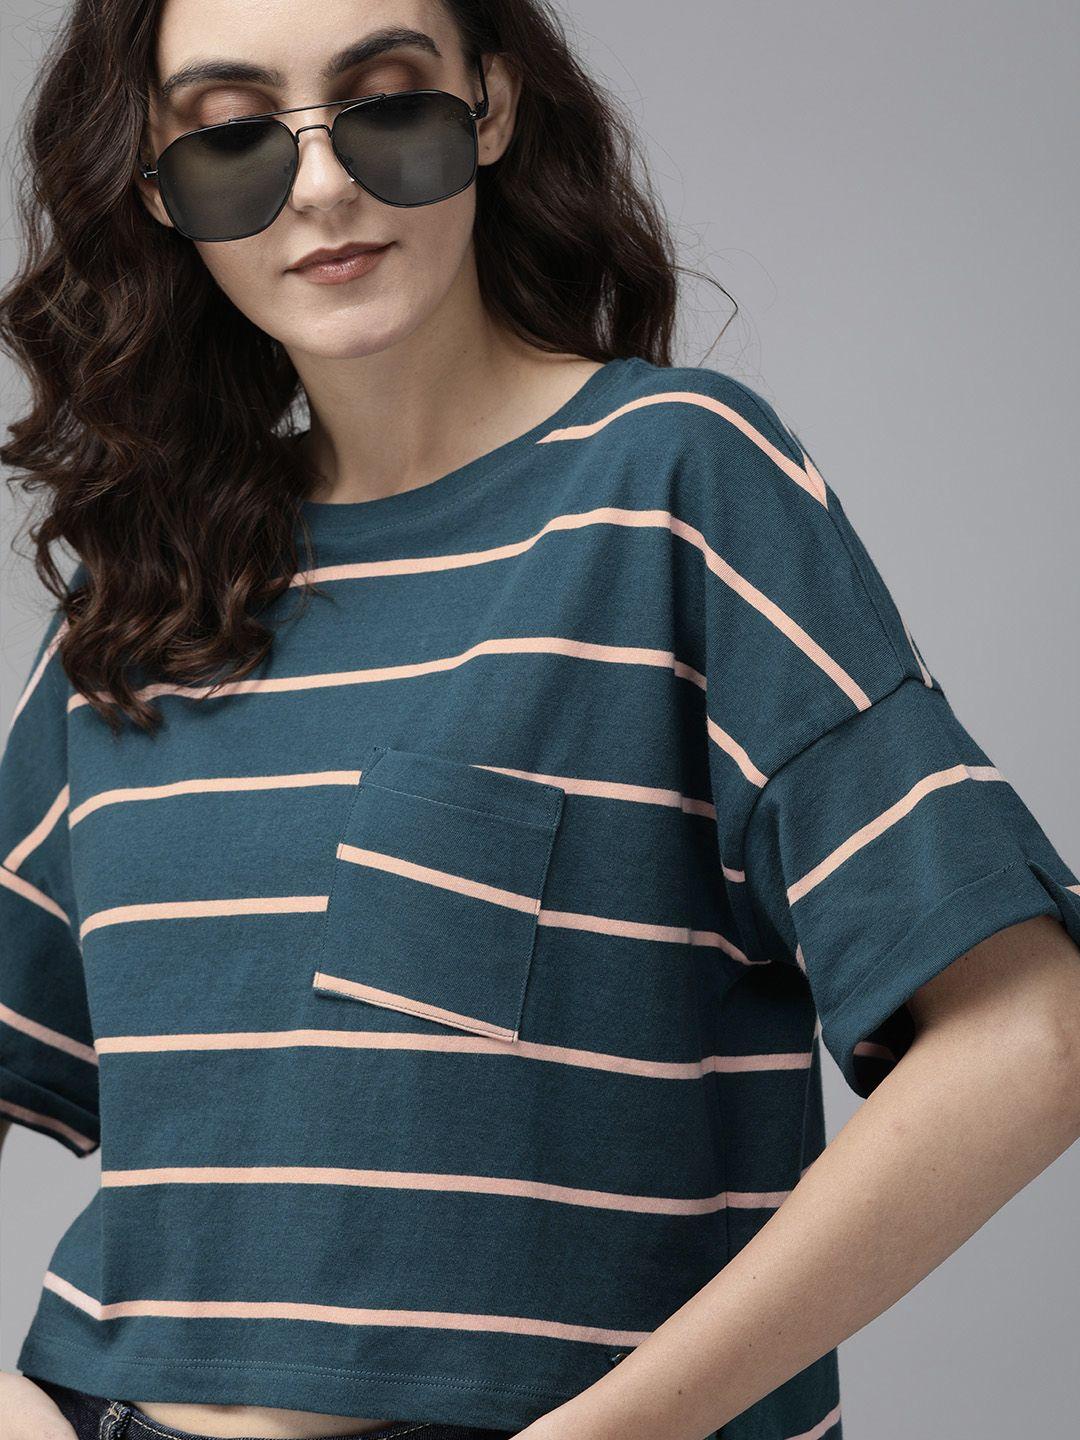 roadster women teal striped round neck t-shirt